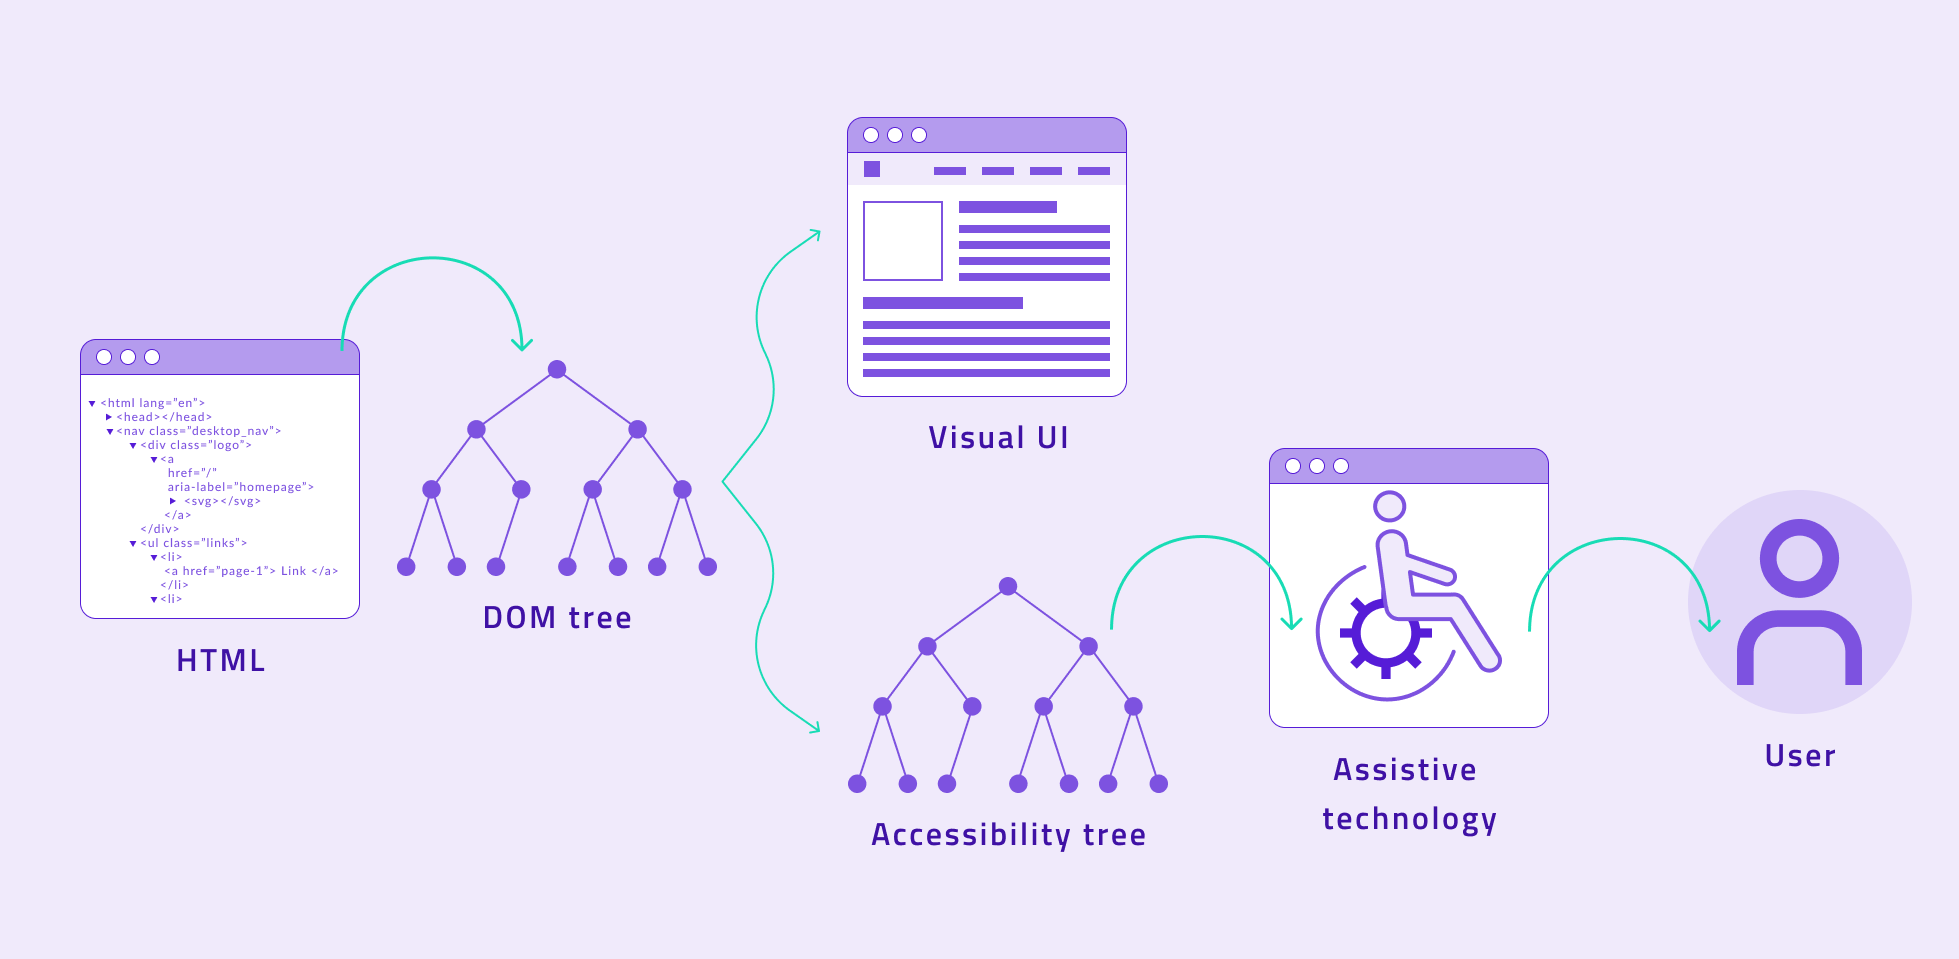 Accessibility tree schema: goes from the HTML to the DOM Tree that has an impact on the Visual UI and the Accessibility tree. The accessibility tree will give the right information to the assistive technology and at the end, for the user